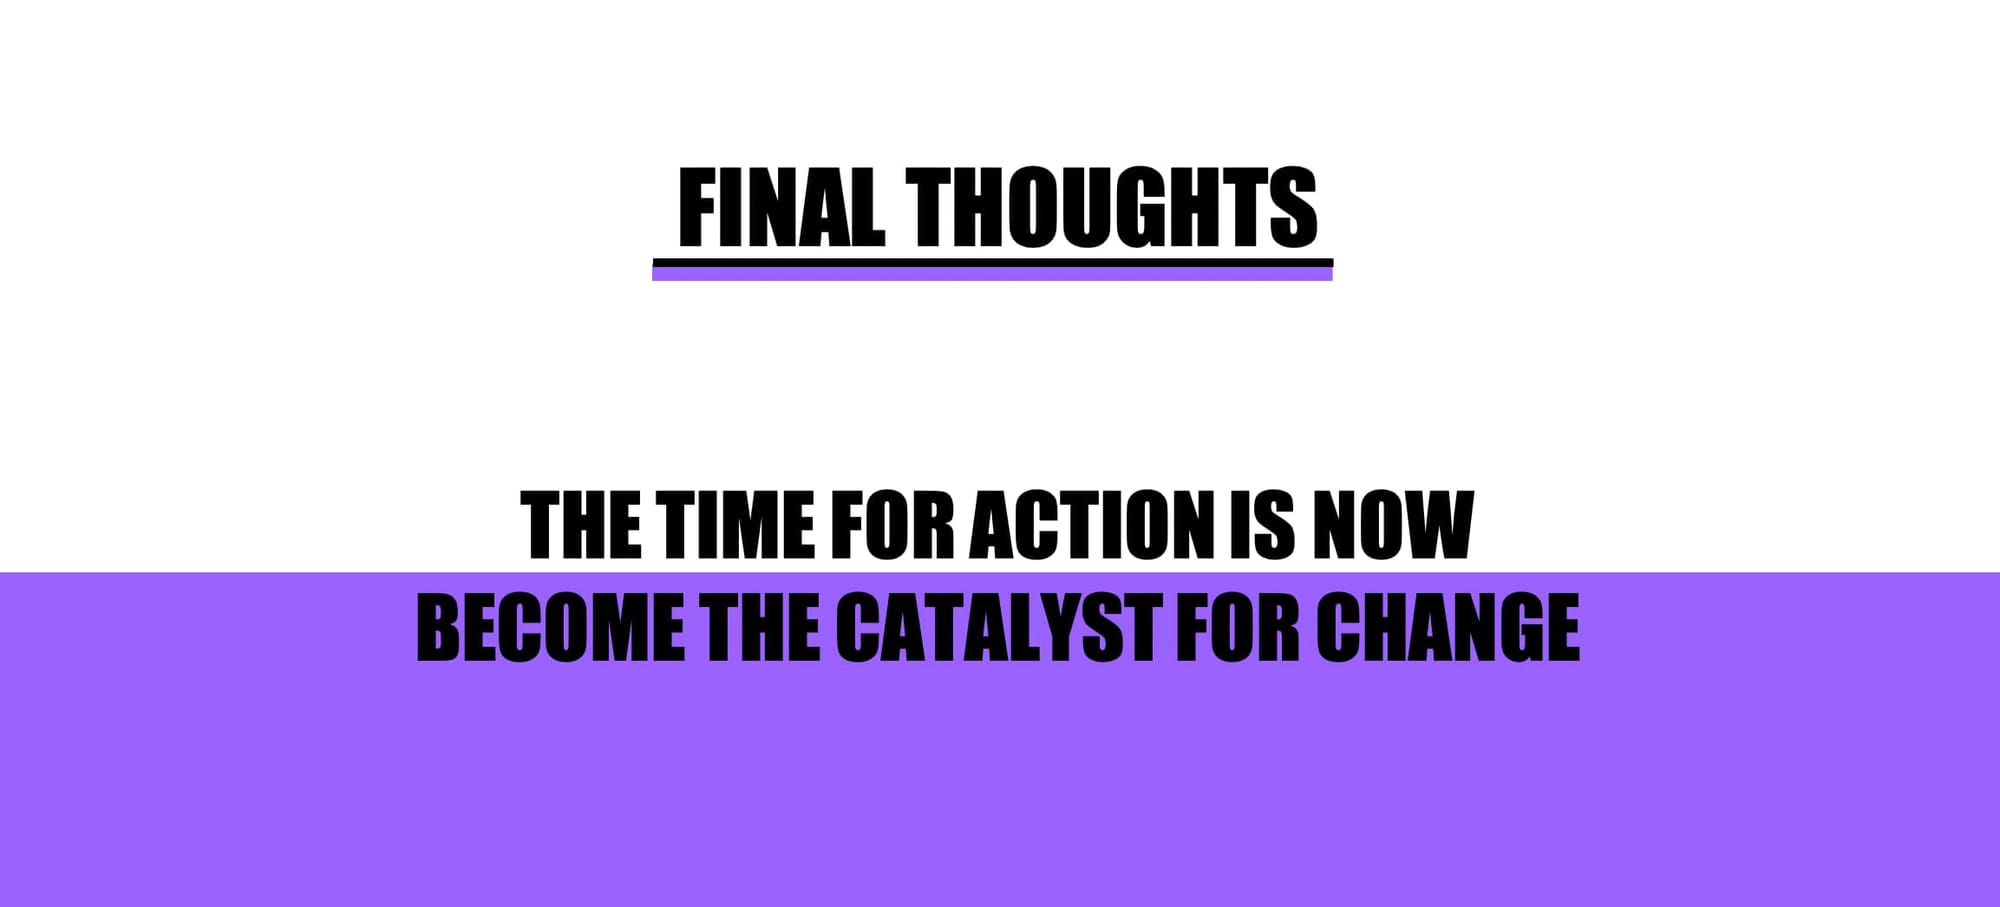 HEADER: THE TIME FOR ACTION IS NOW - BECOME THE CATALYST FOR CHANGE